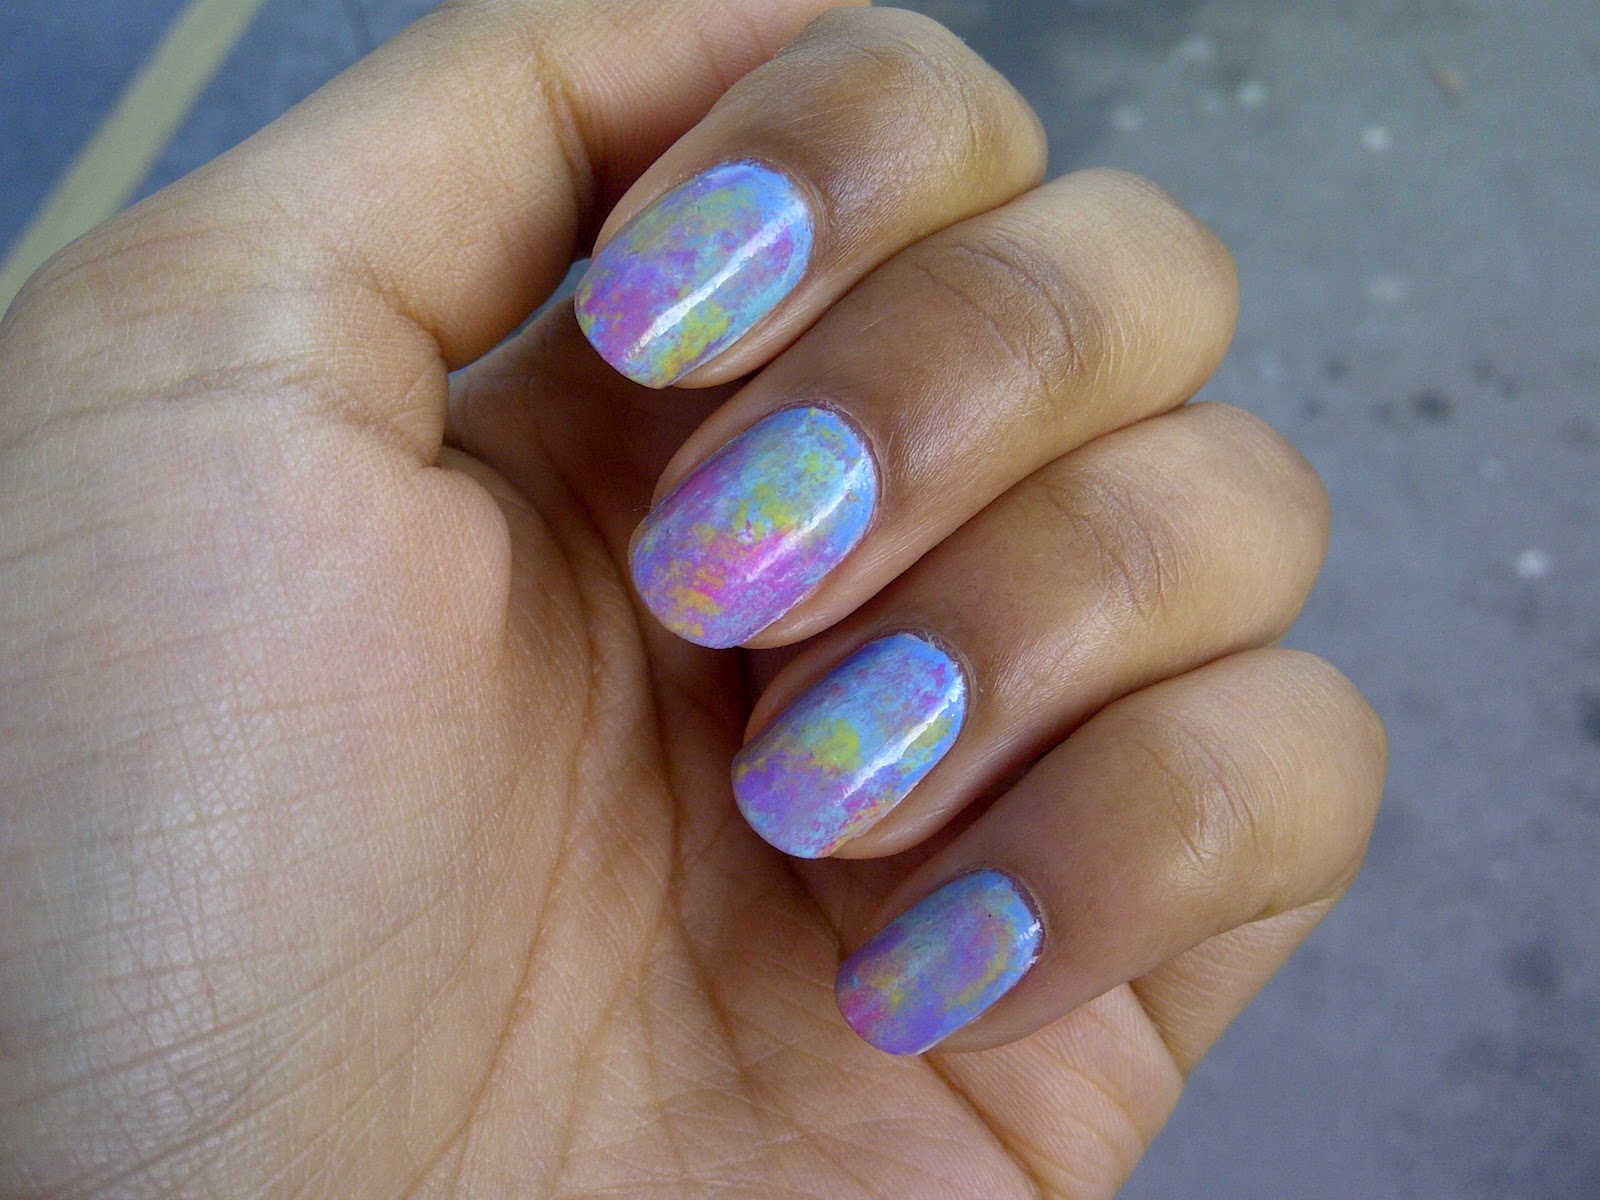 10. Pink and Blue Tie-Dye Nails - wide 8